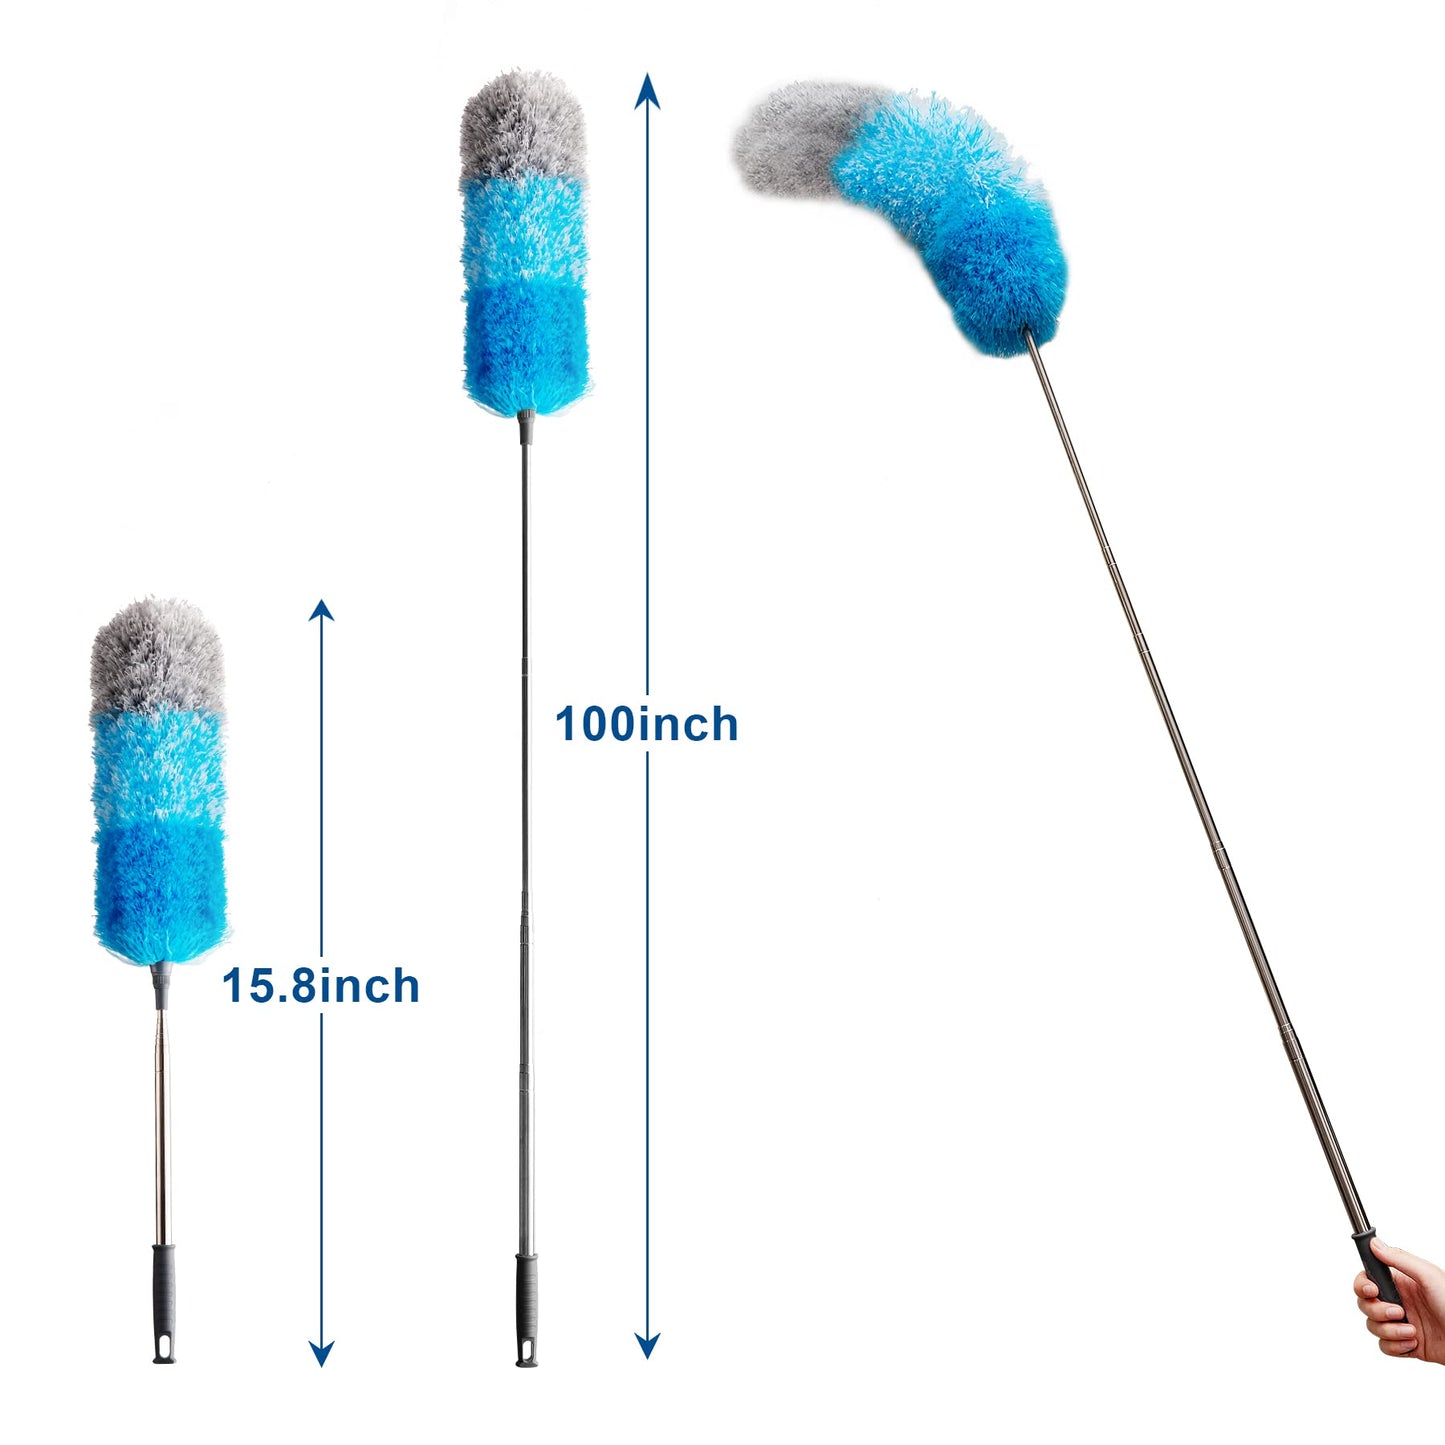 Eyliden Microfiber Duster, 85" Telescoping Stainless Steel Handle, Scratch-Resistant Top, Bendable Dusters Head, Clean for Fans, Blinds, Furniture, Shutters, Cars-top and More